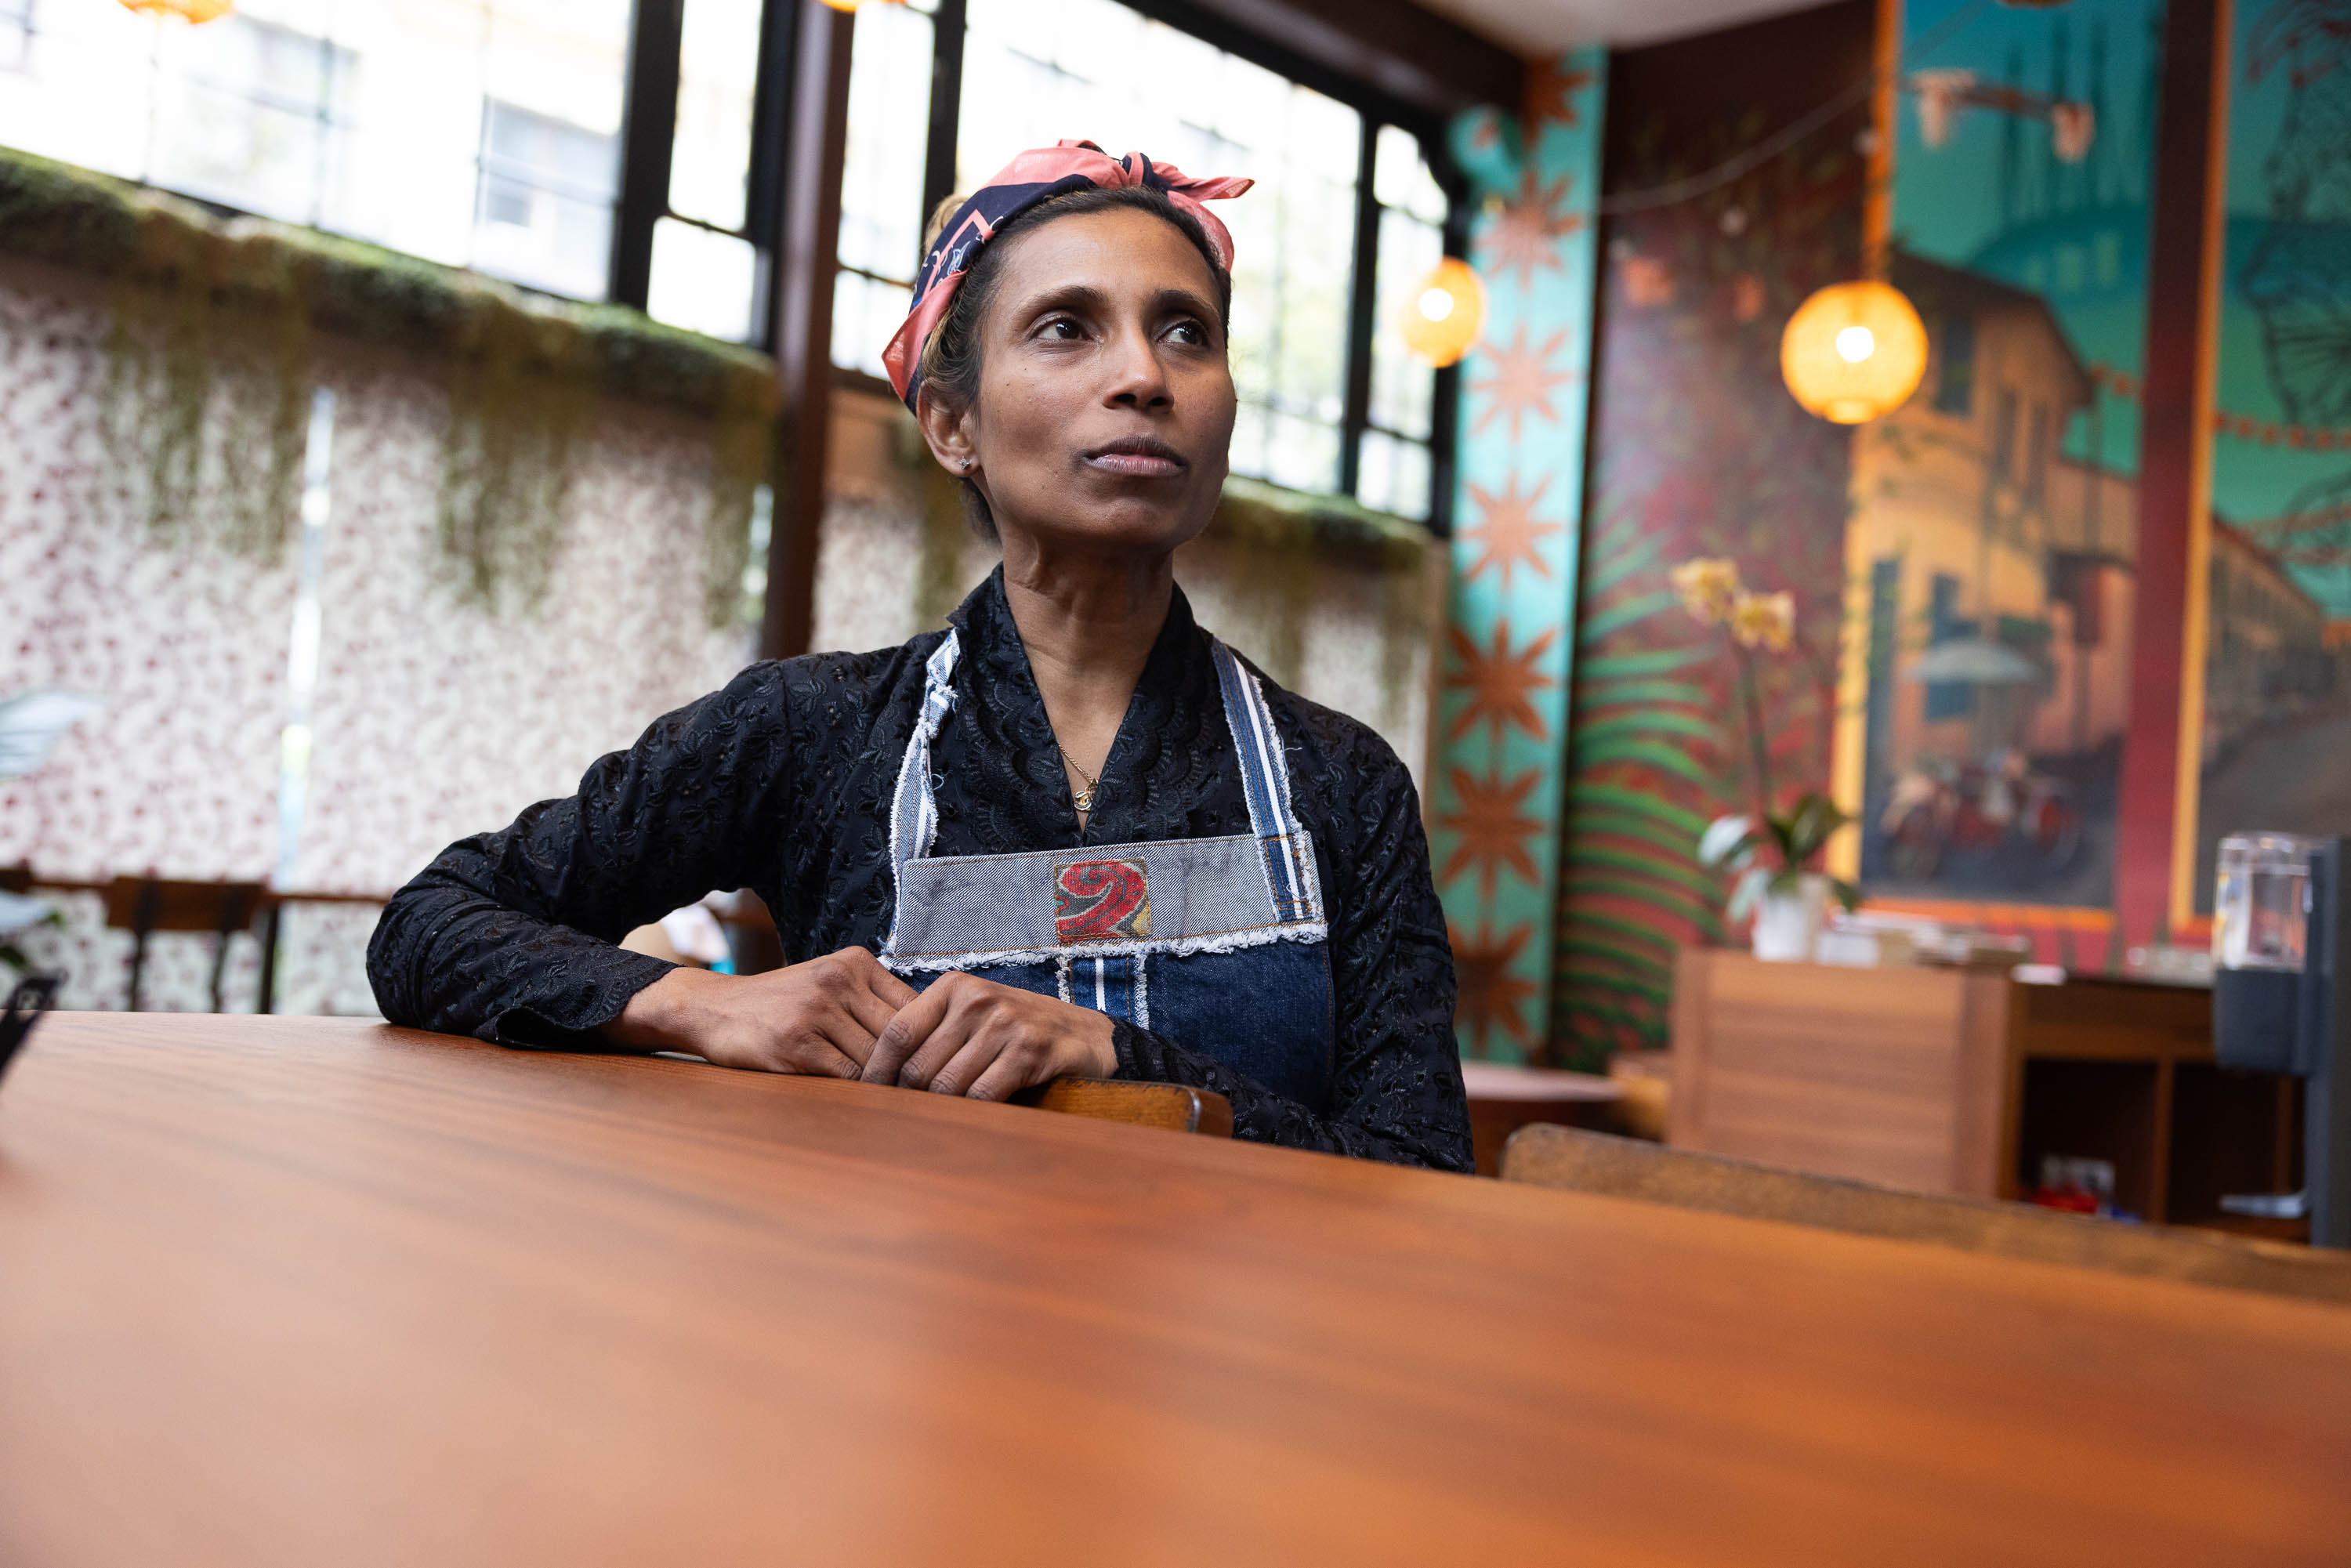 A woman in an apron stands behind a table in a colorful cafe, looking thoughtfully to the side.